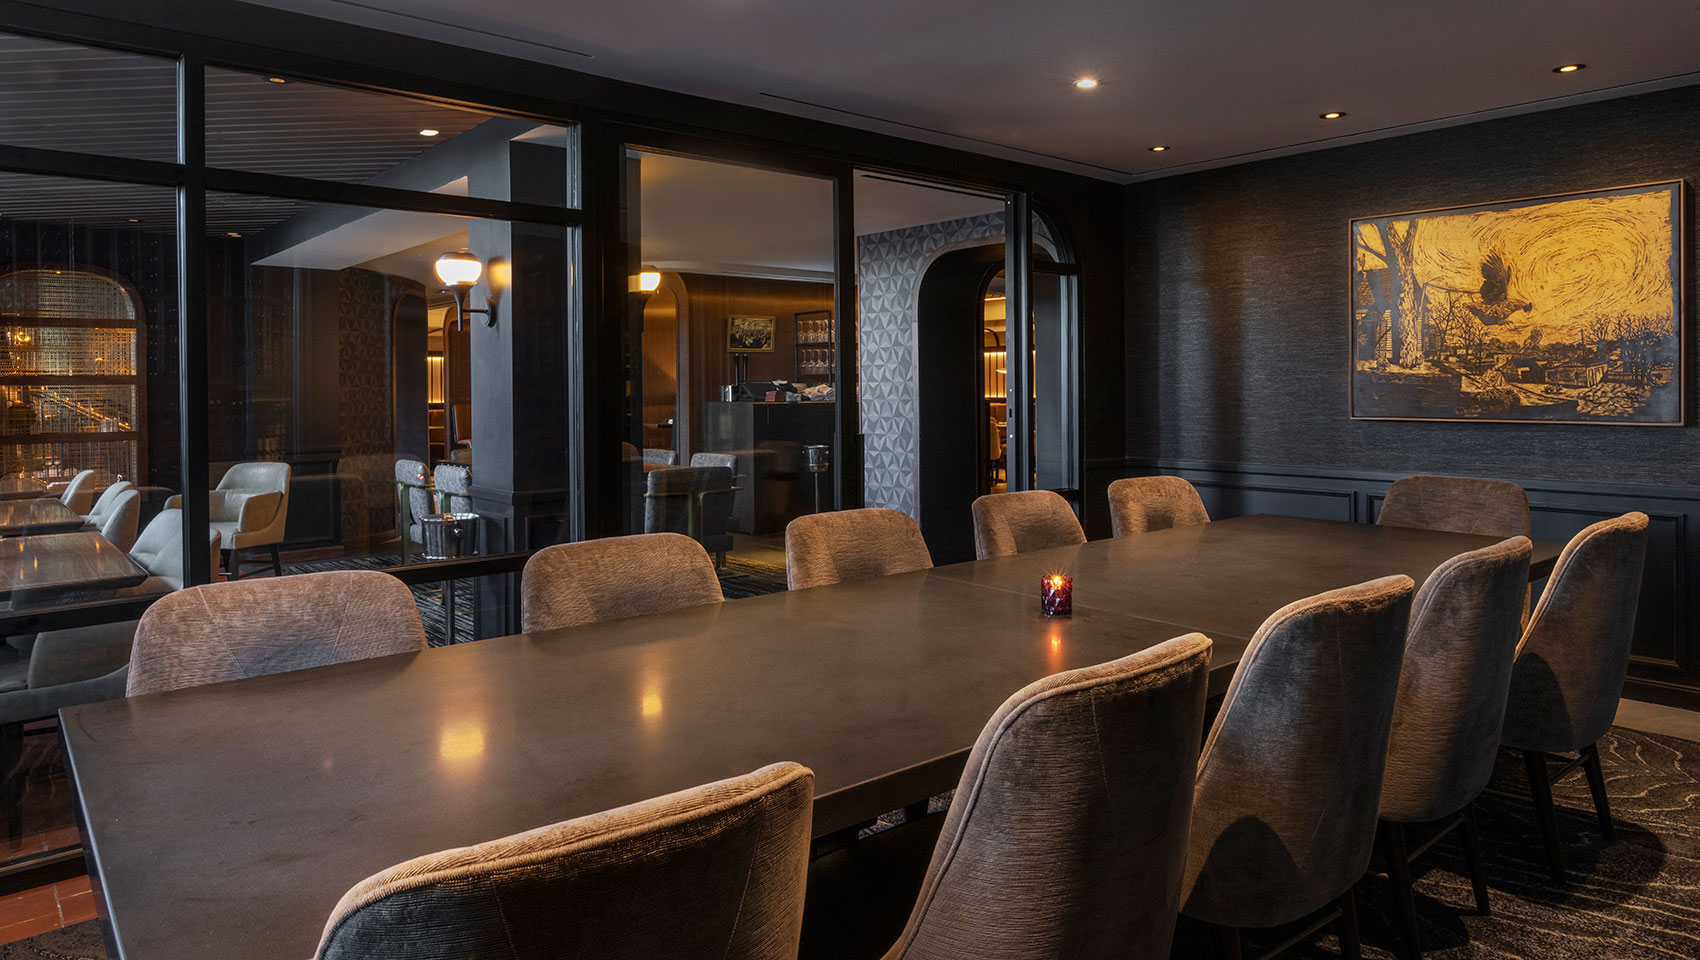 Rooms private dining london restaurants covent room garden vip luxury table event sushisamba restaurant nightlife discover each around services find